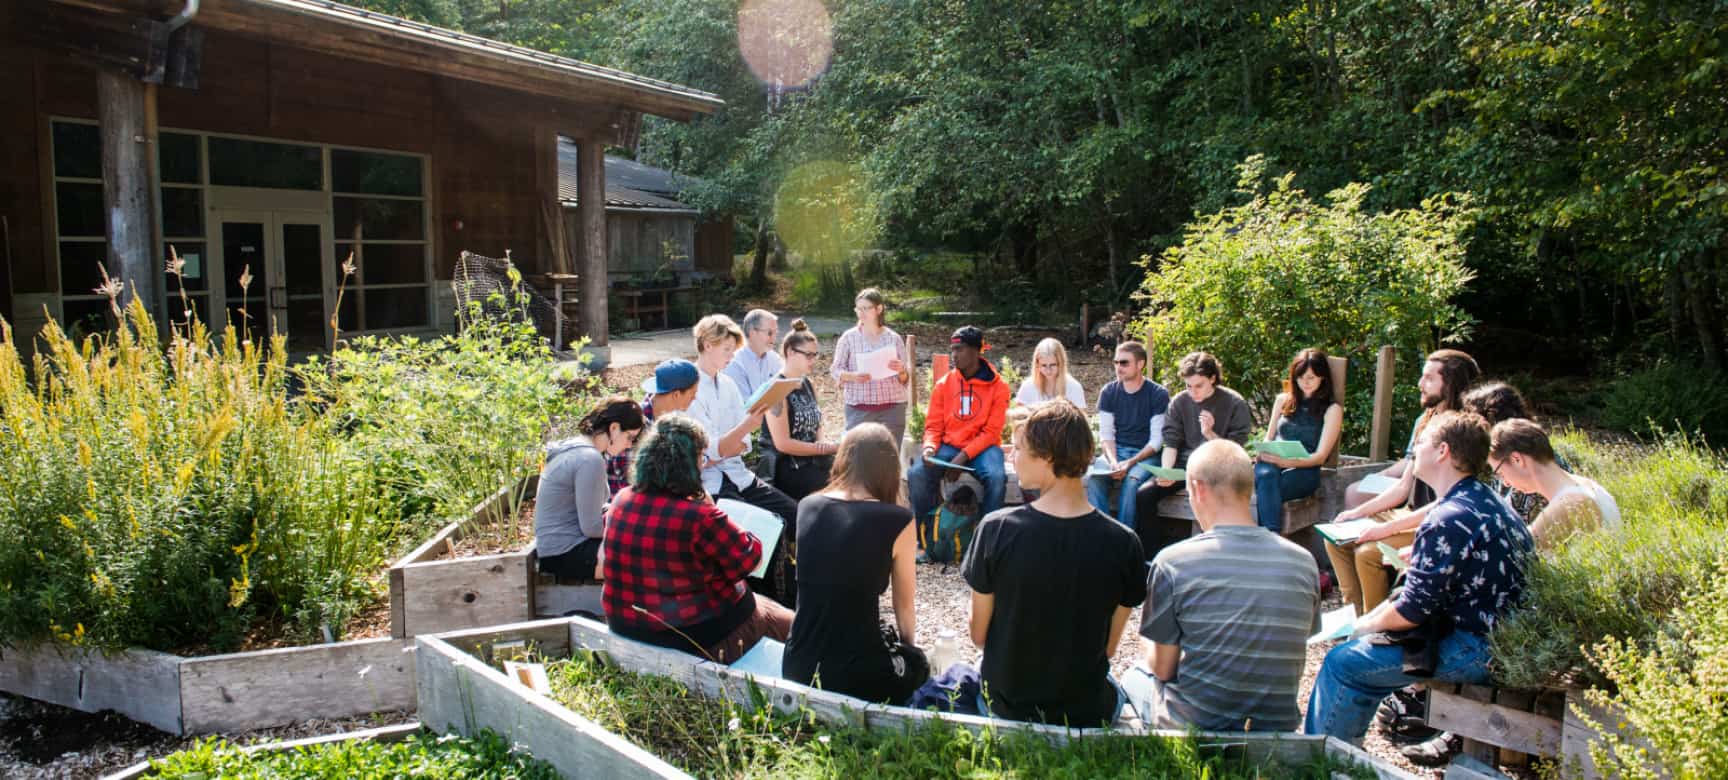 Photograph of students of all ages and races, holding a discussion on chairs in a circle outside amongst shrubs and bushes. A large wooden cabin is in the background.